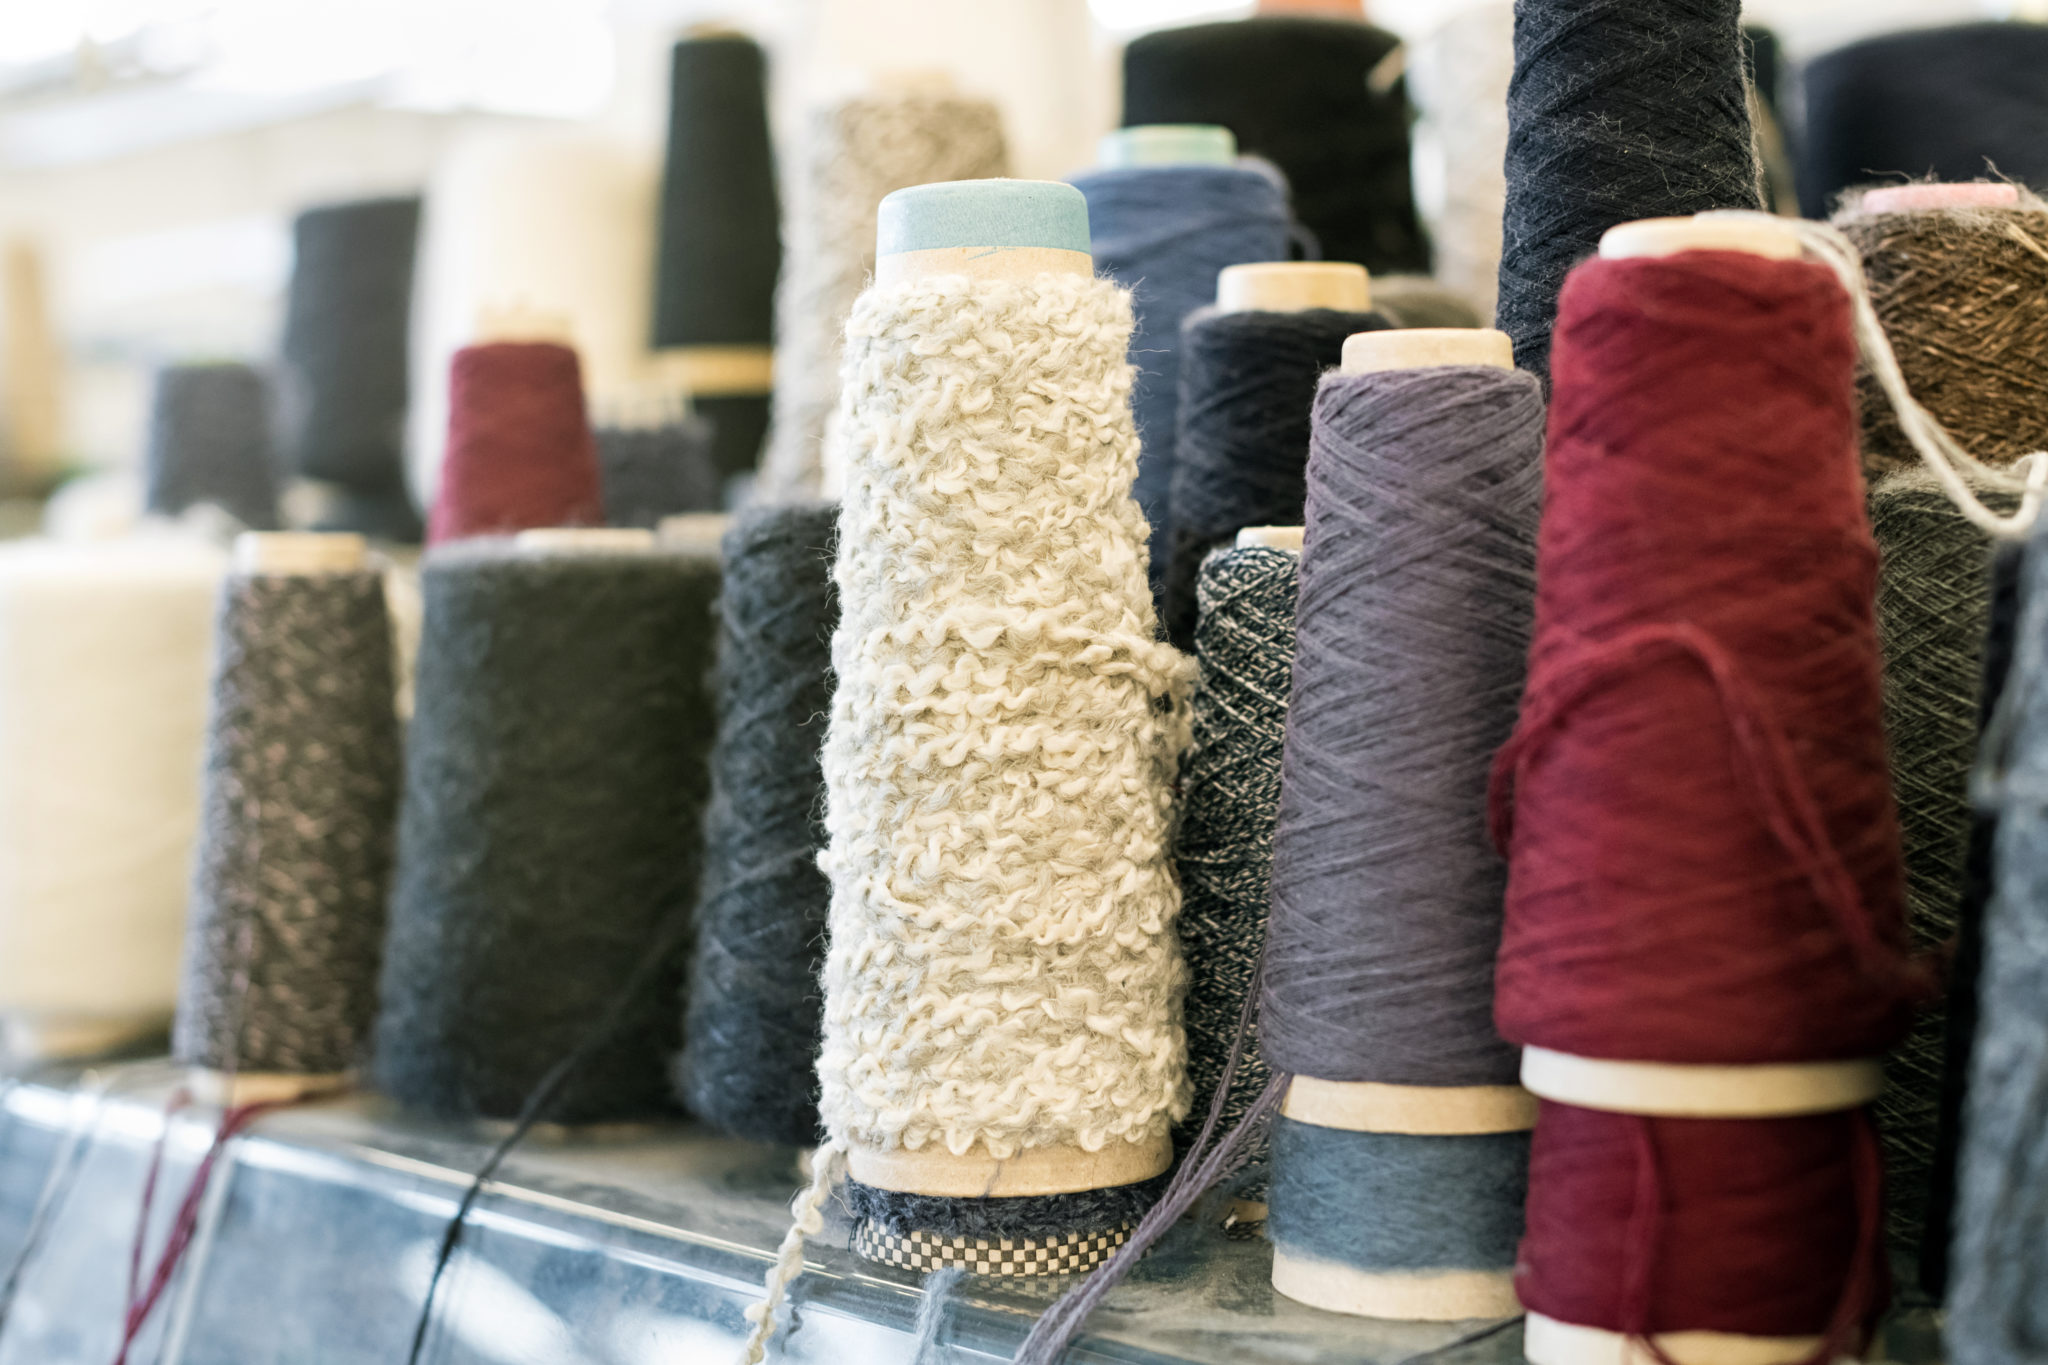 Spools and reels of spun cashmere wool or yarn in assorted colors and textures on a shelf in close up